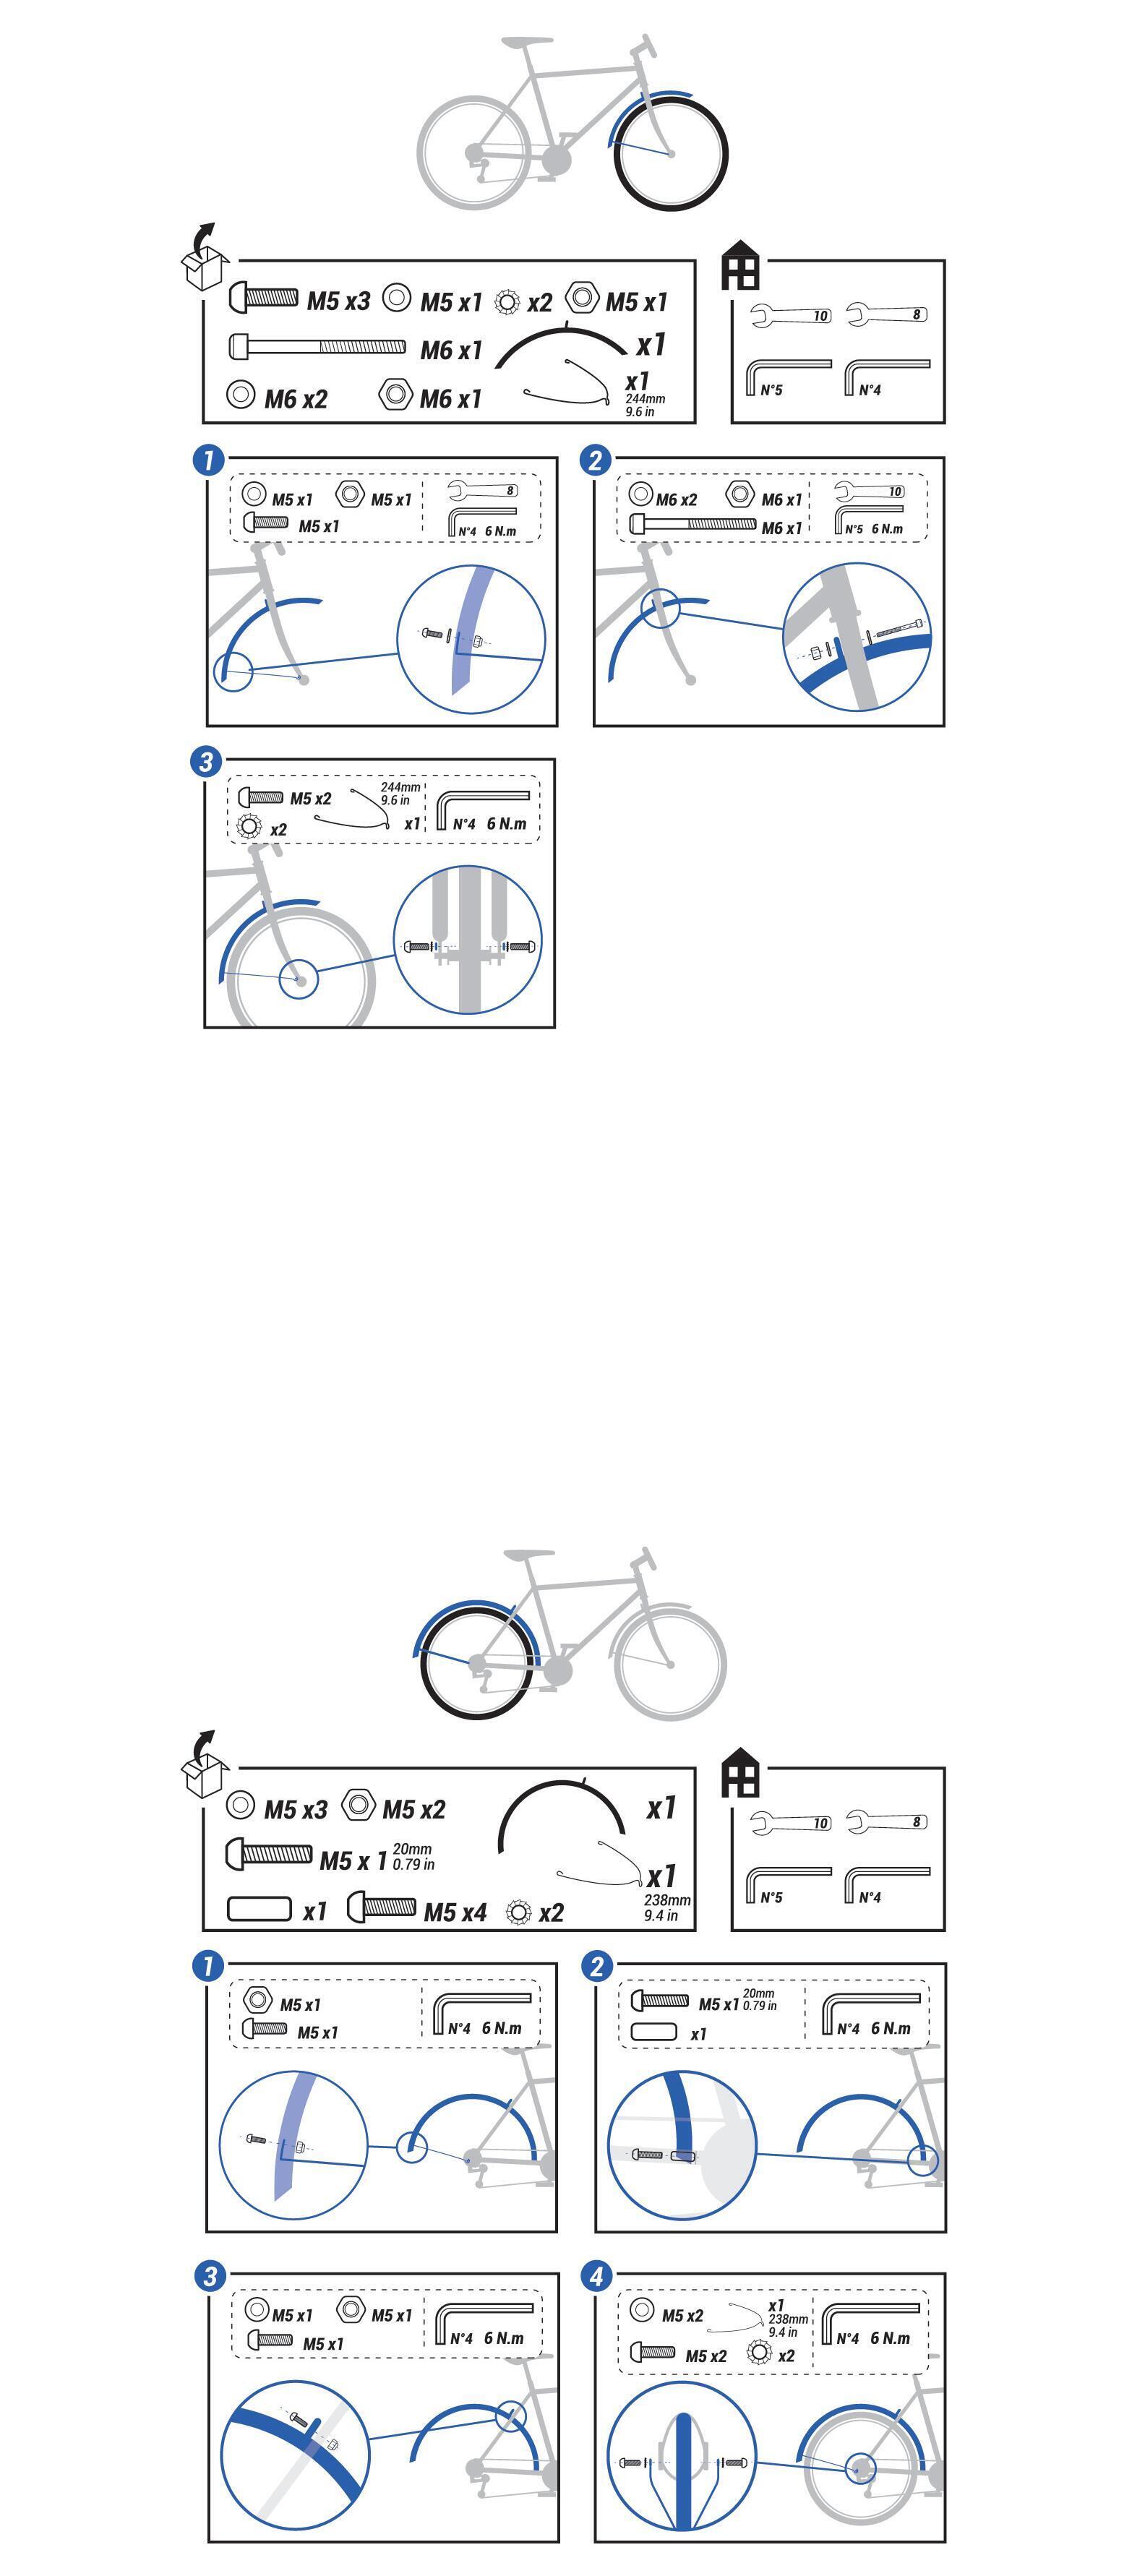 how-to-fit-mudguards-hybrid-bike